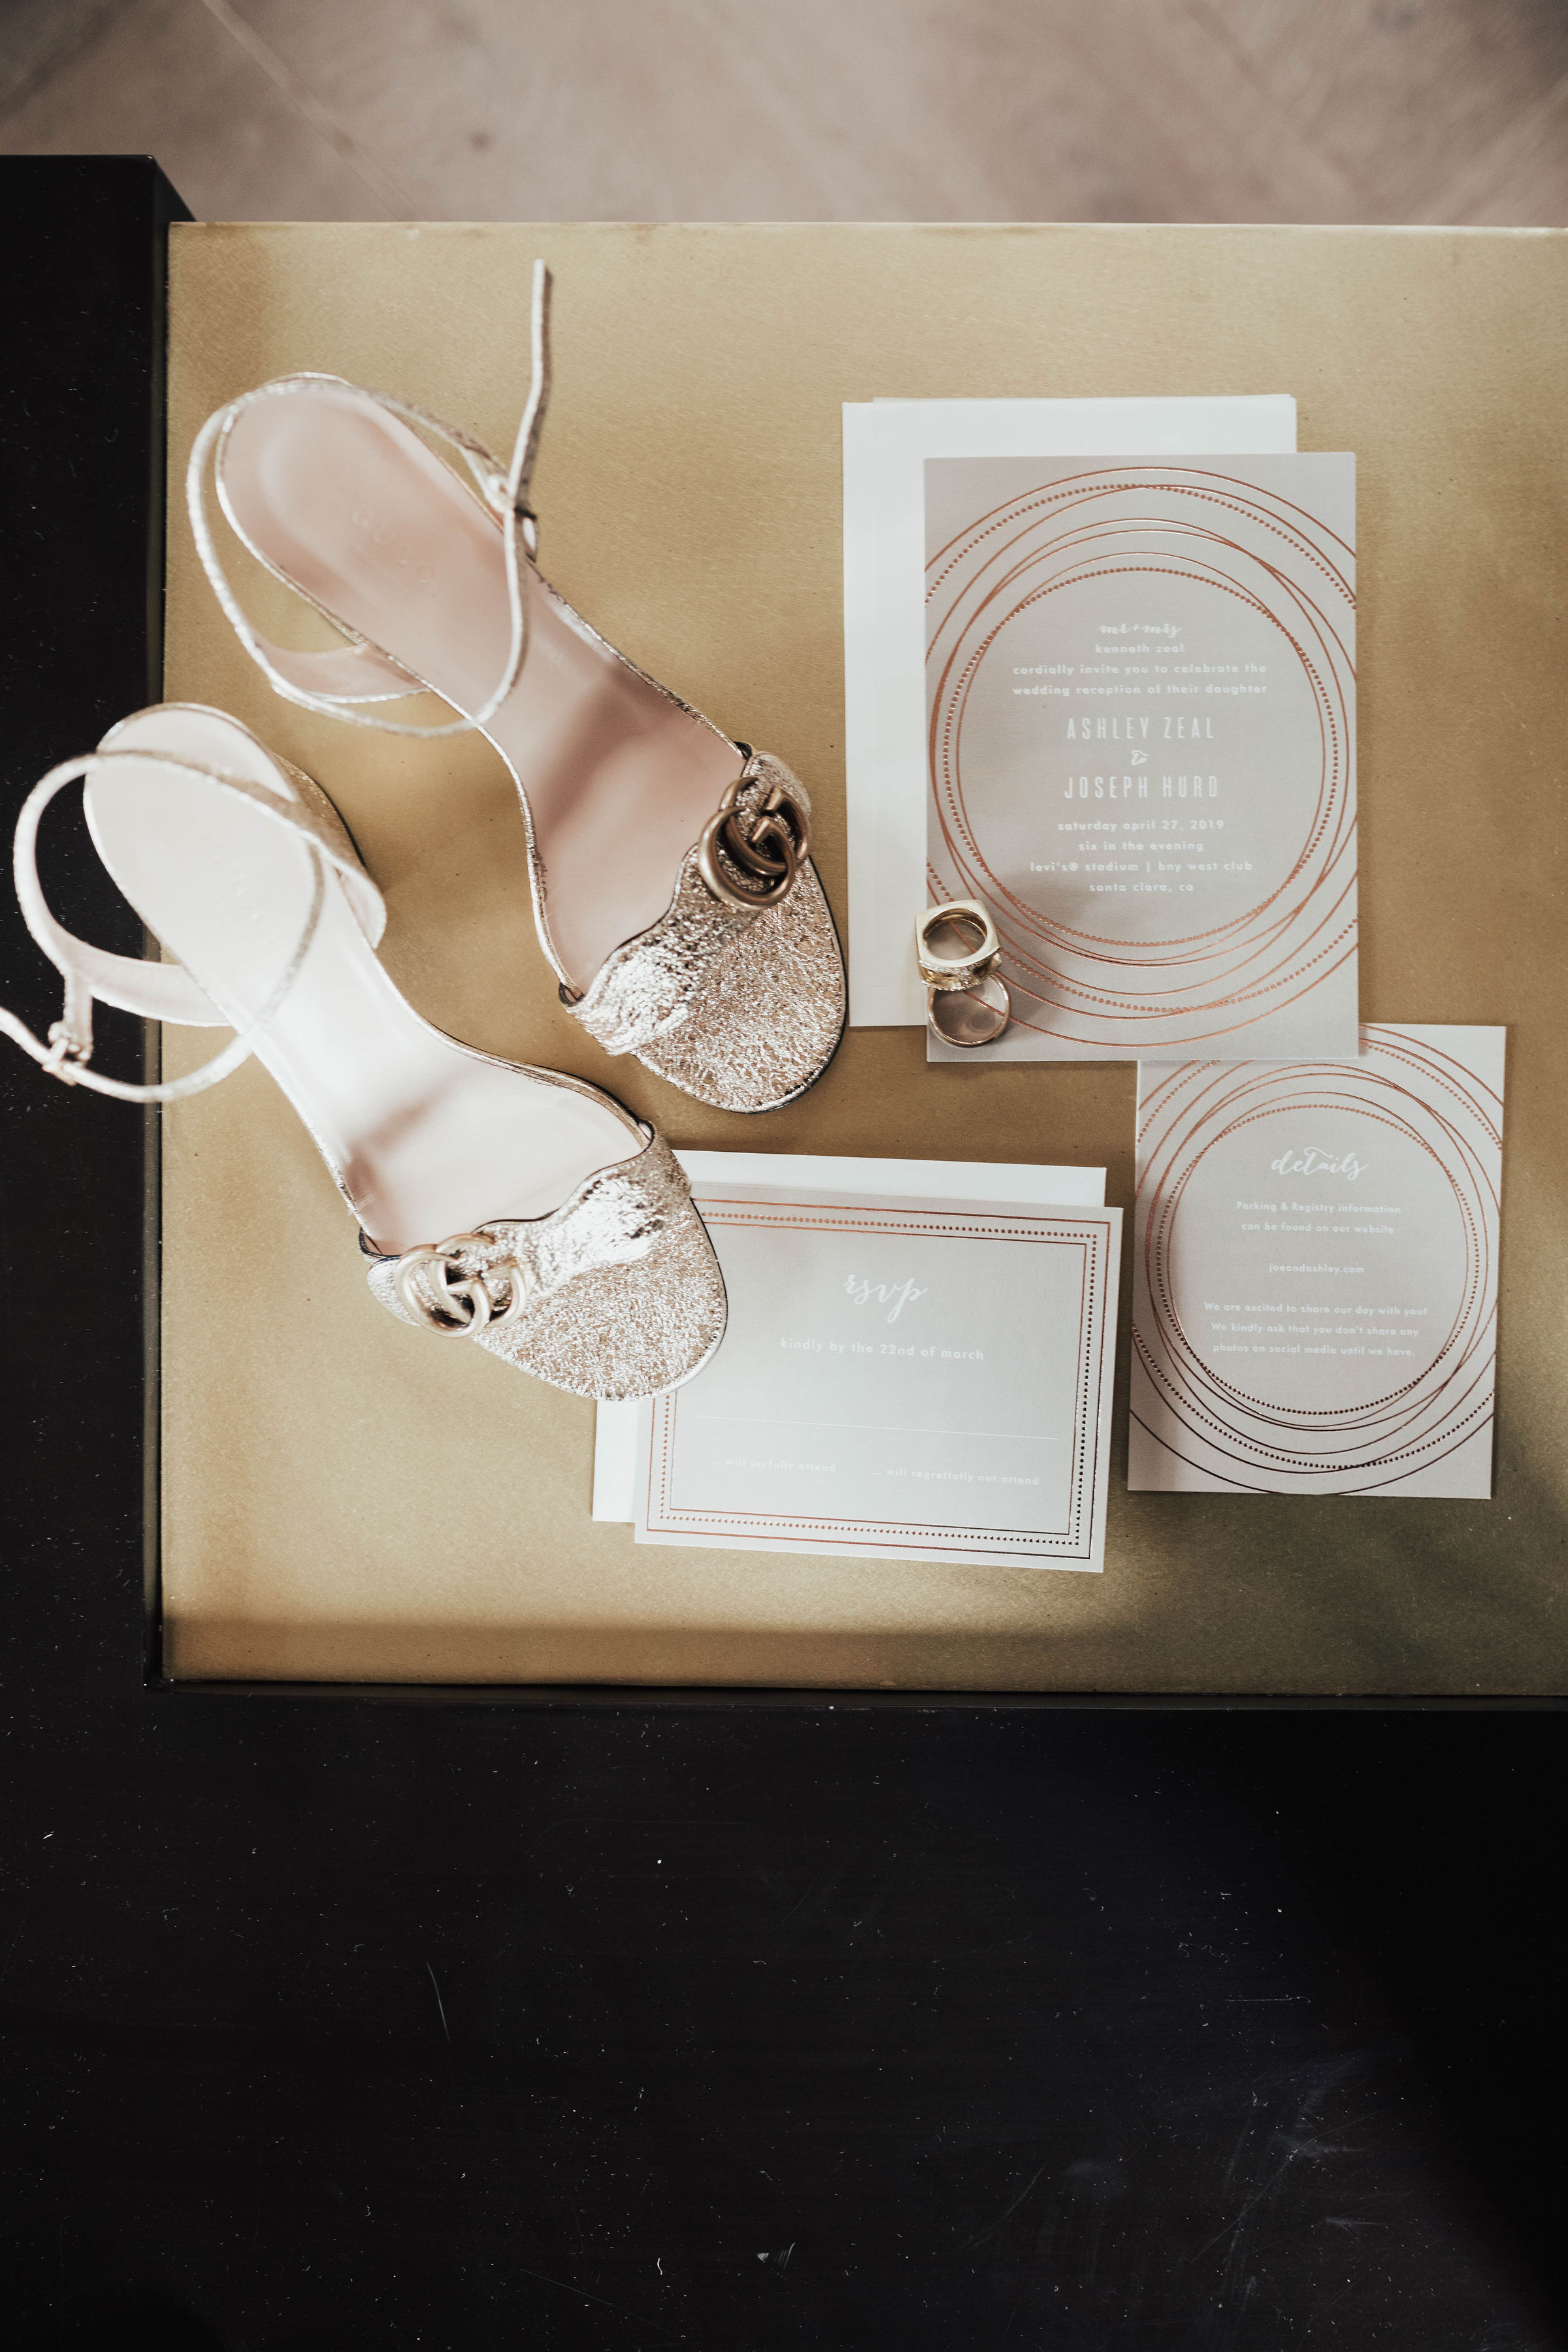 San Francisco blogger, Ashley Zeal, from Two Peas in a Prada shares her wedding invites and day of stationery for her San Francisco city hall wedding from Minted weddings.